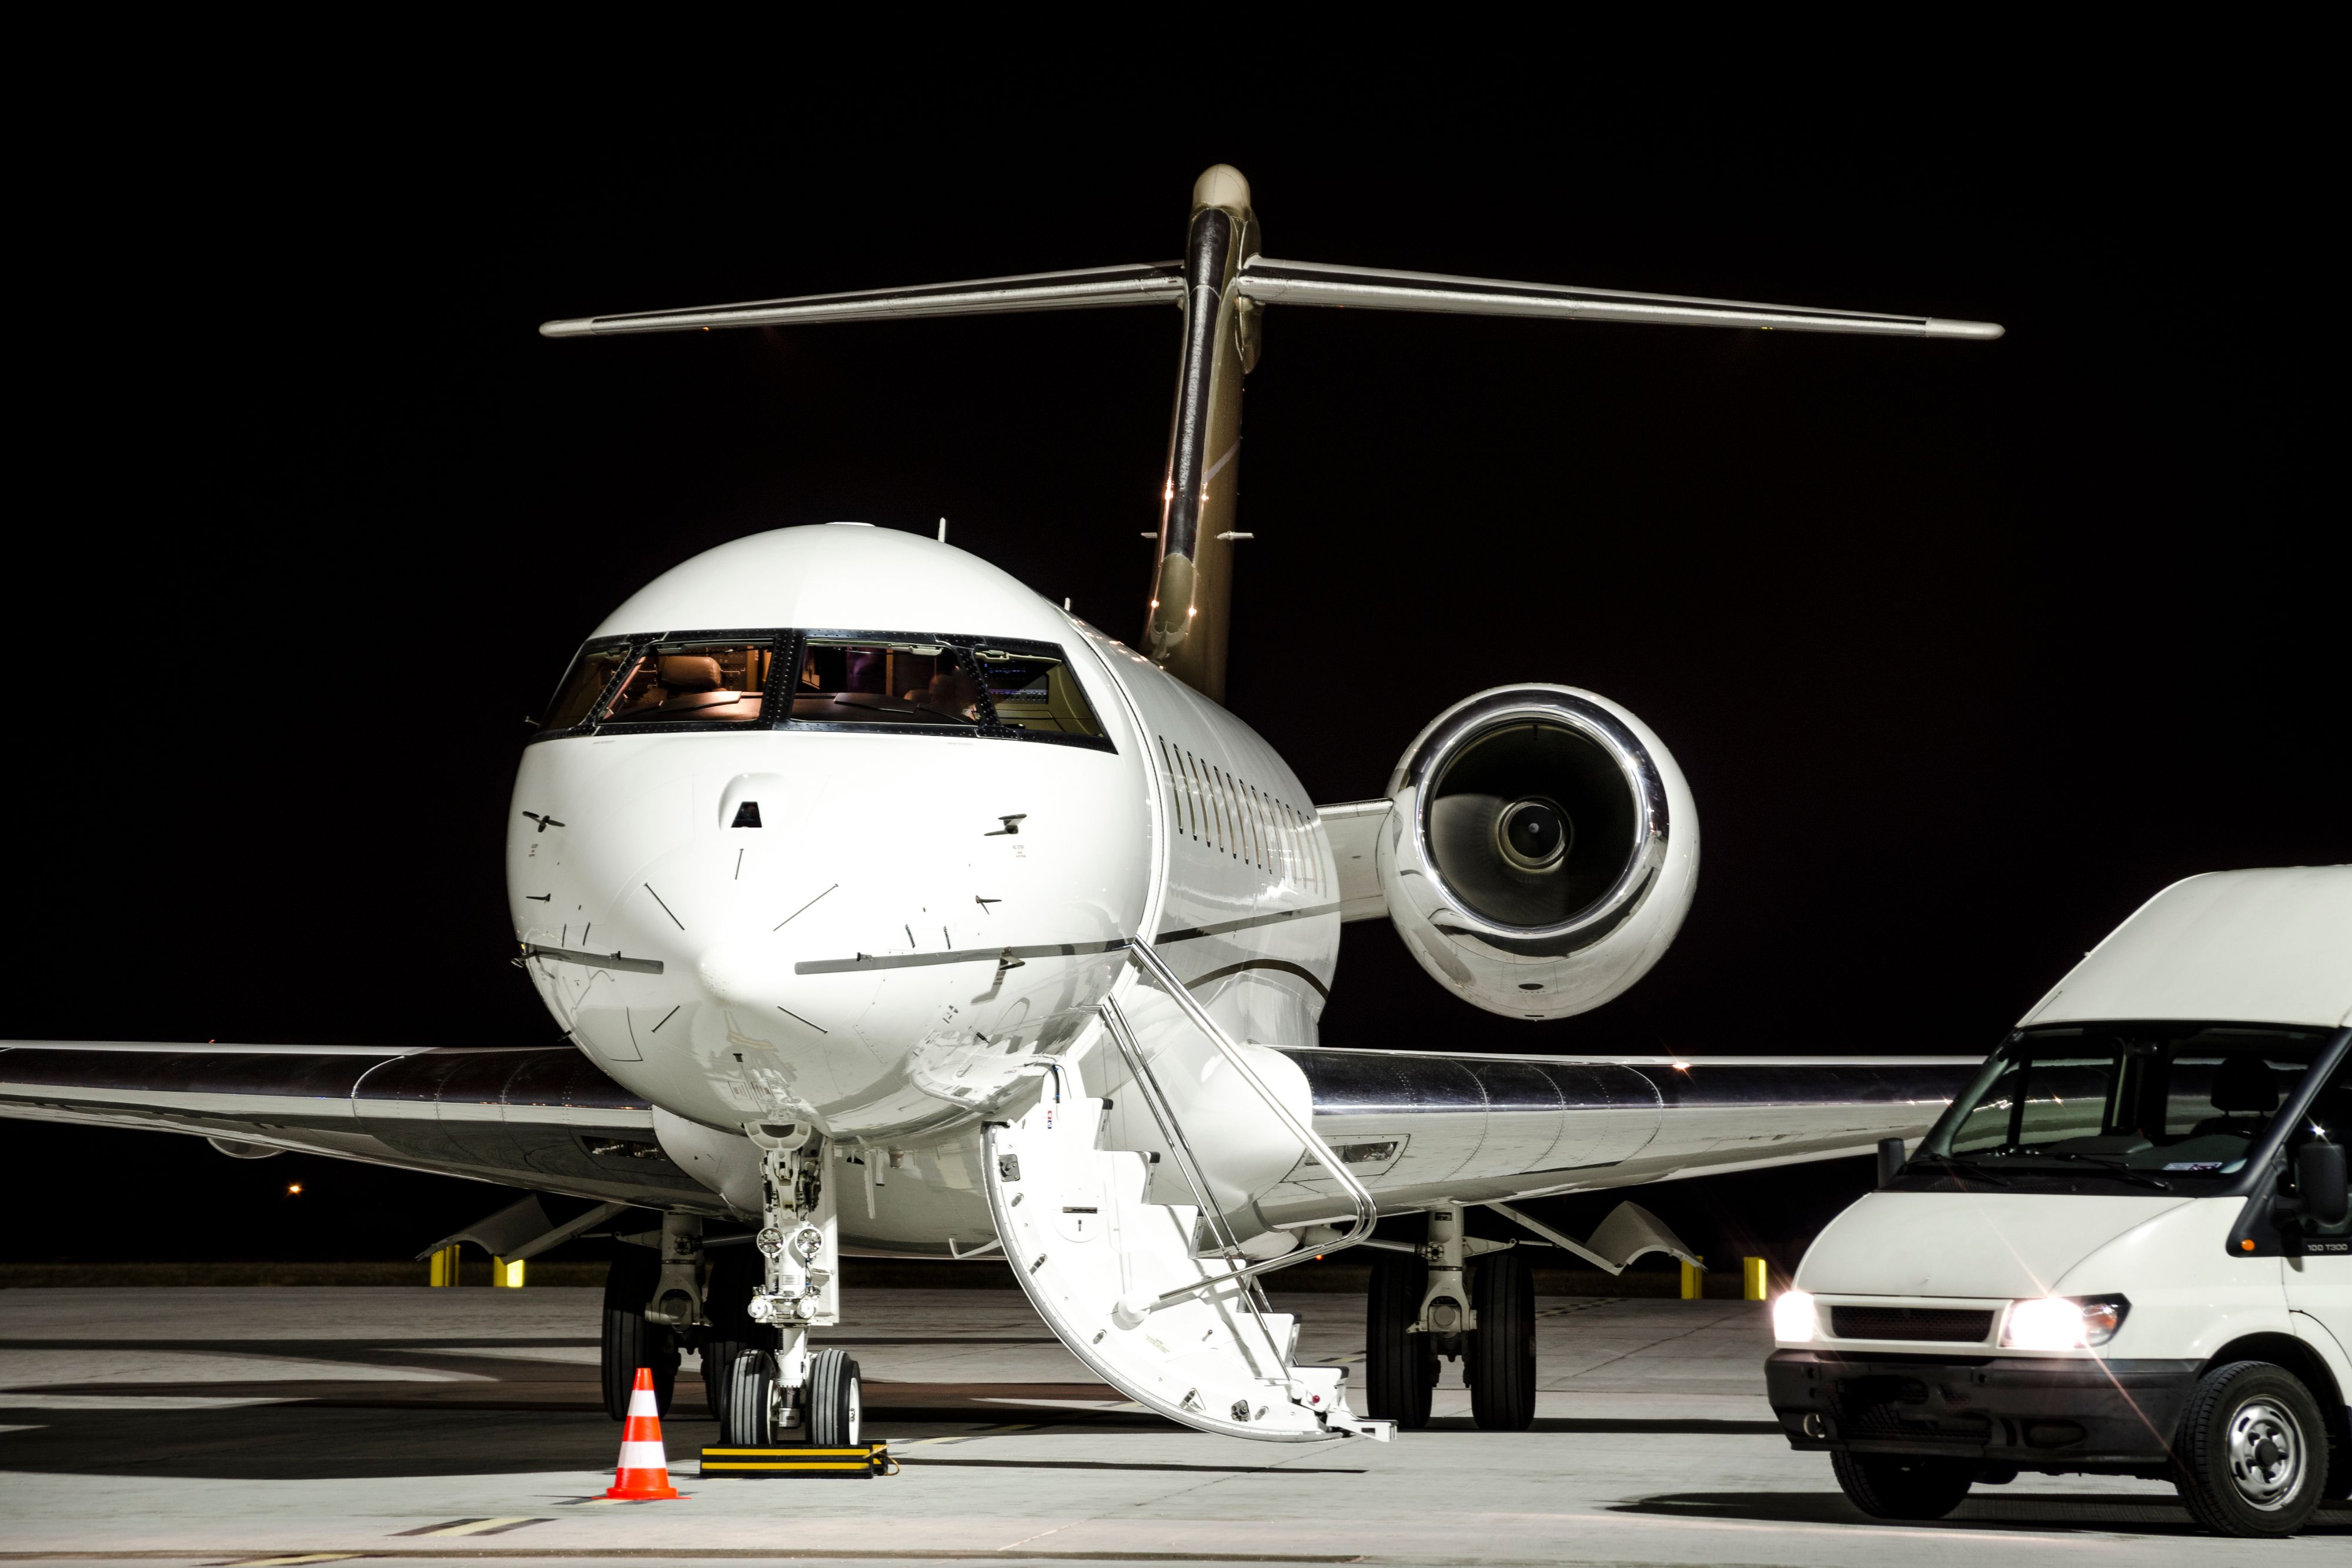 A van parked next to a private jet.